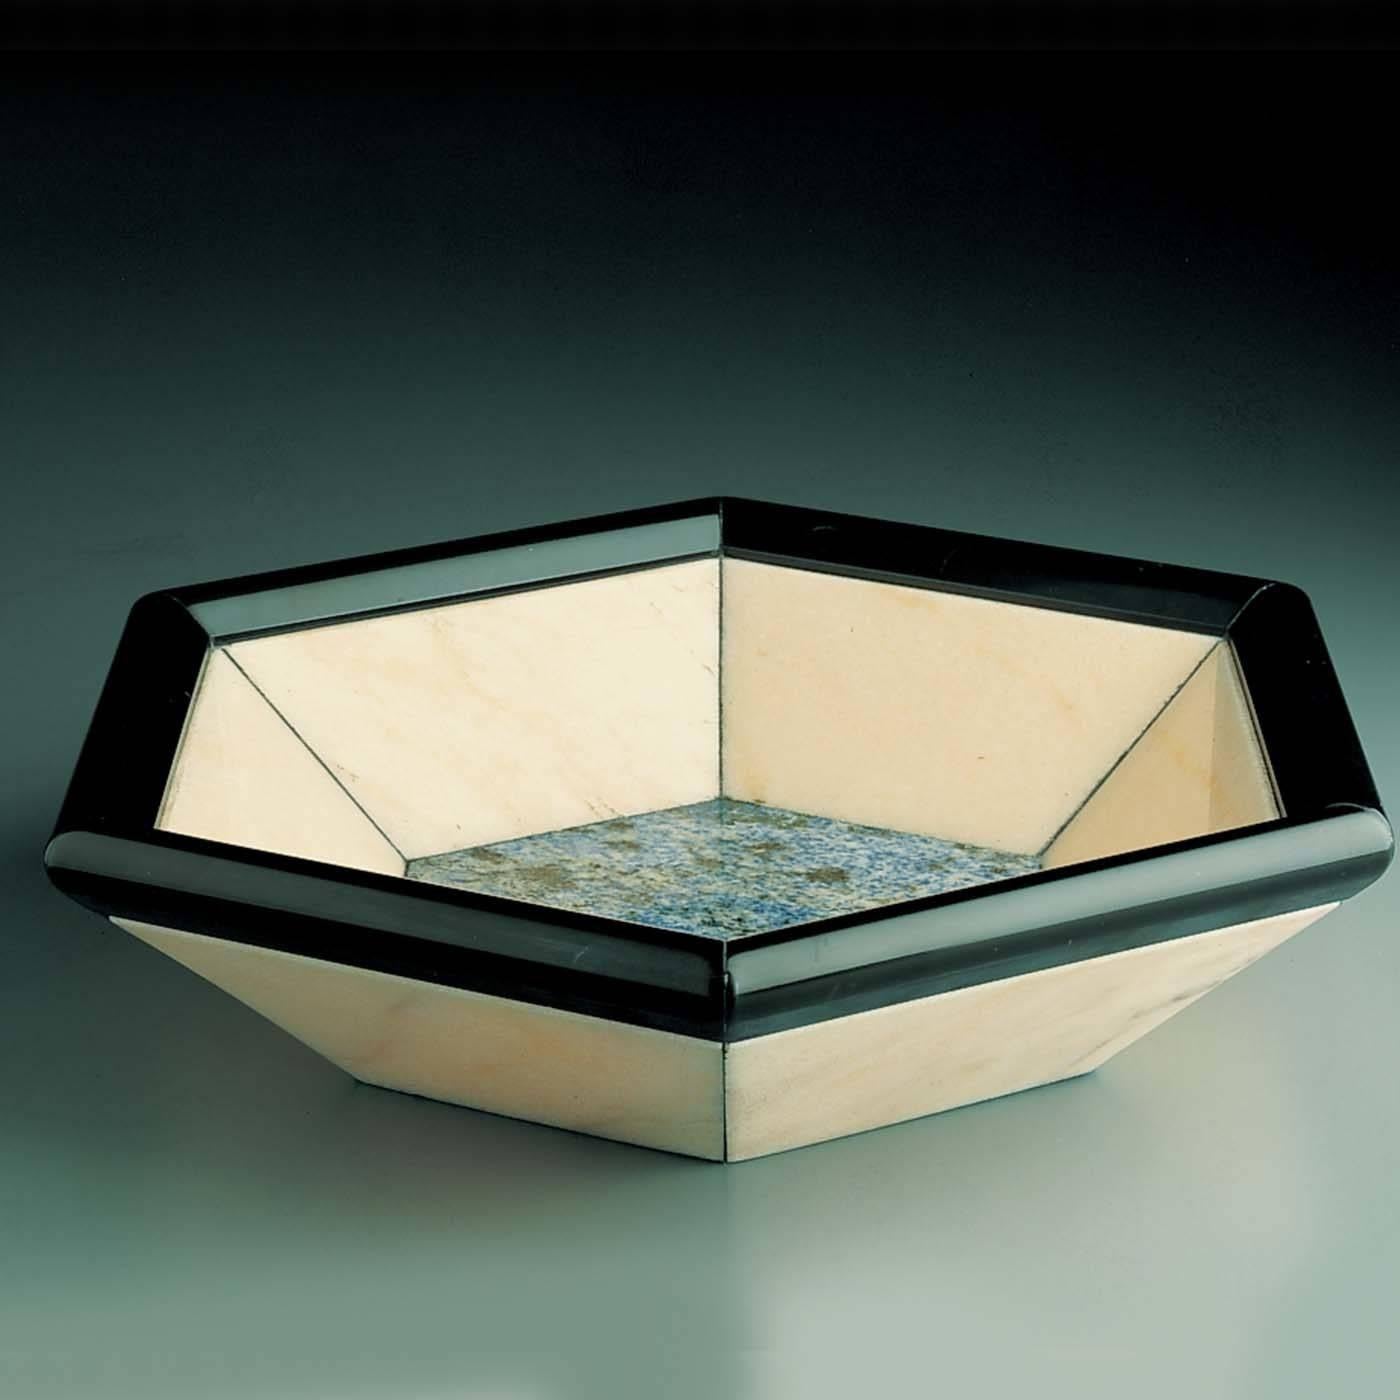 A truly exquisite object of functional decor, this handcrafted, versatile object has an hexagonal sodalite base with six trapezoidal panels in pink Rosa Portogallo marble extending outwardly and a bold rim of black Belgio marble. The geometric shape